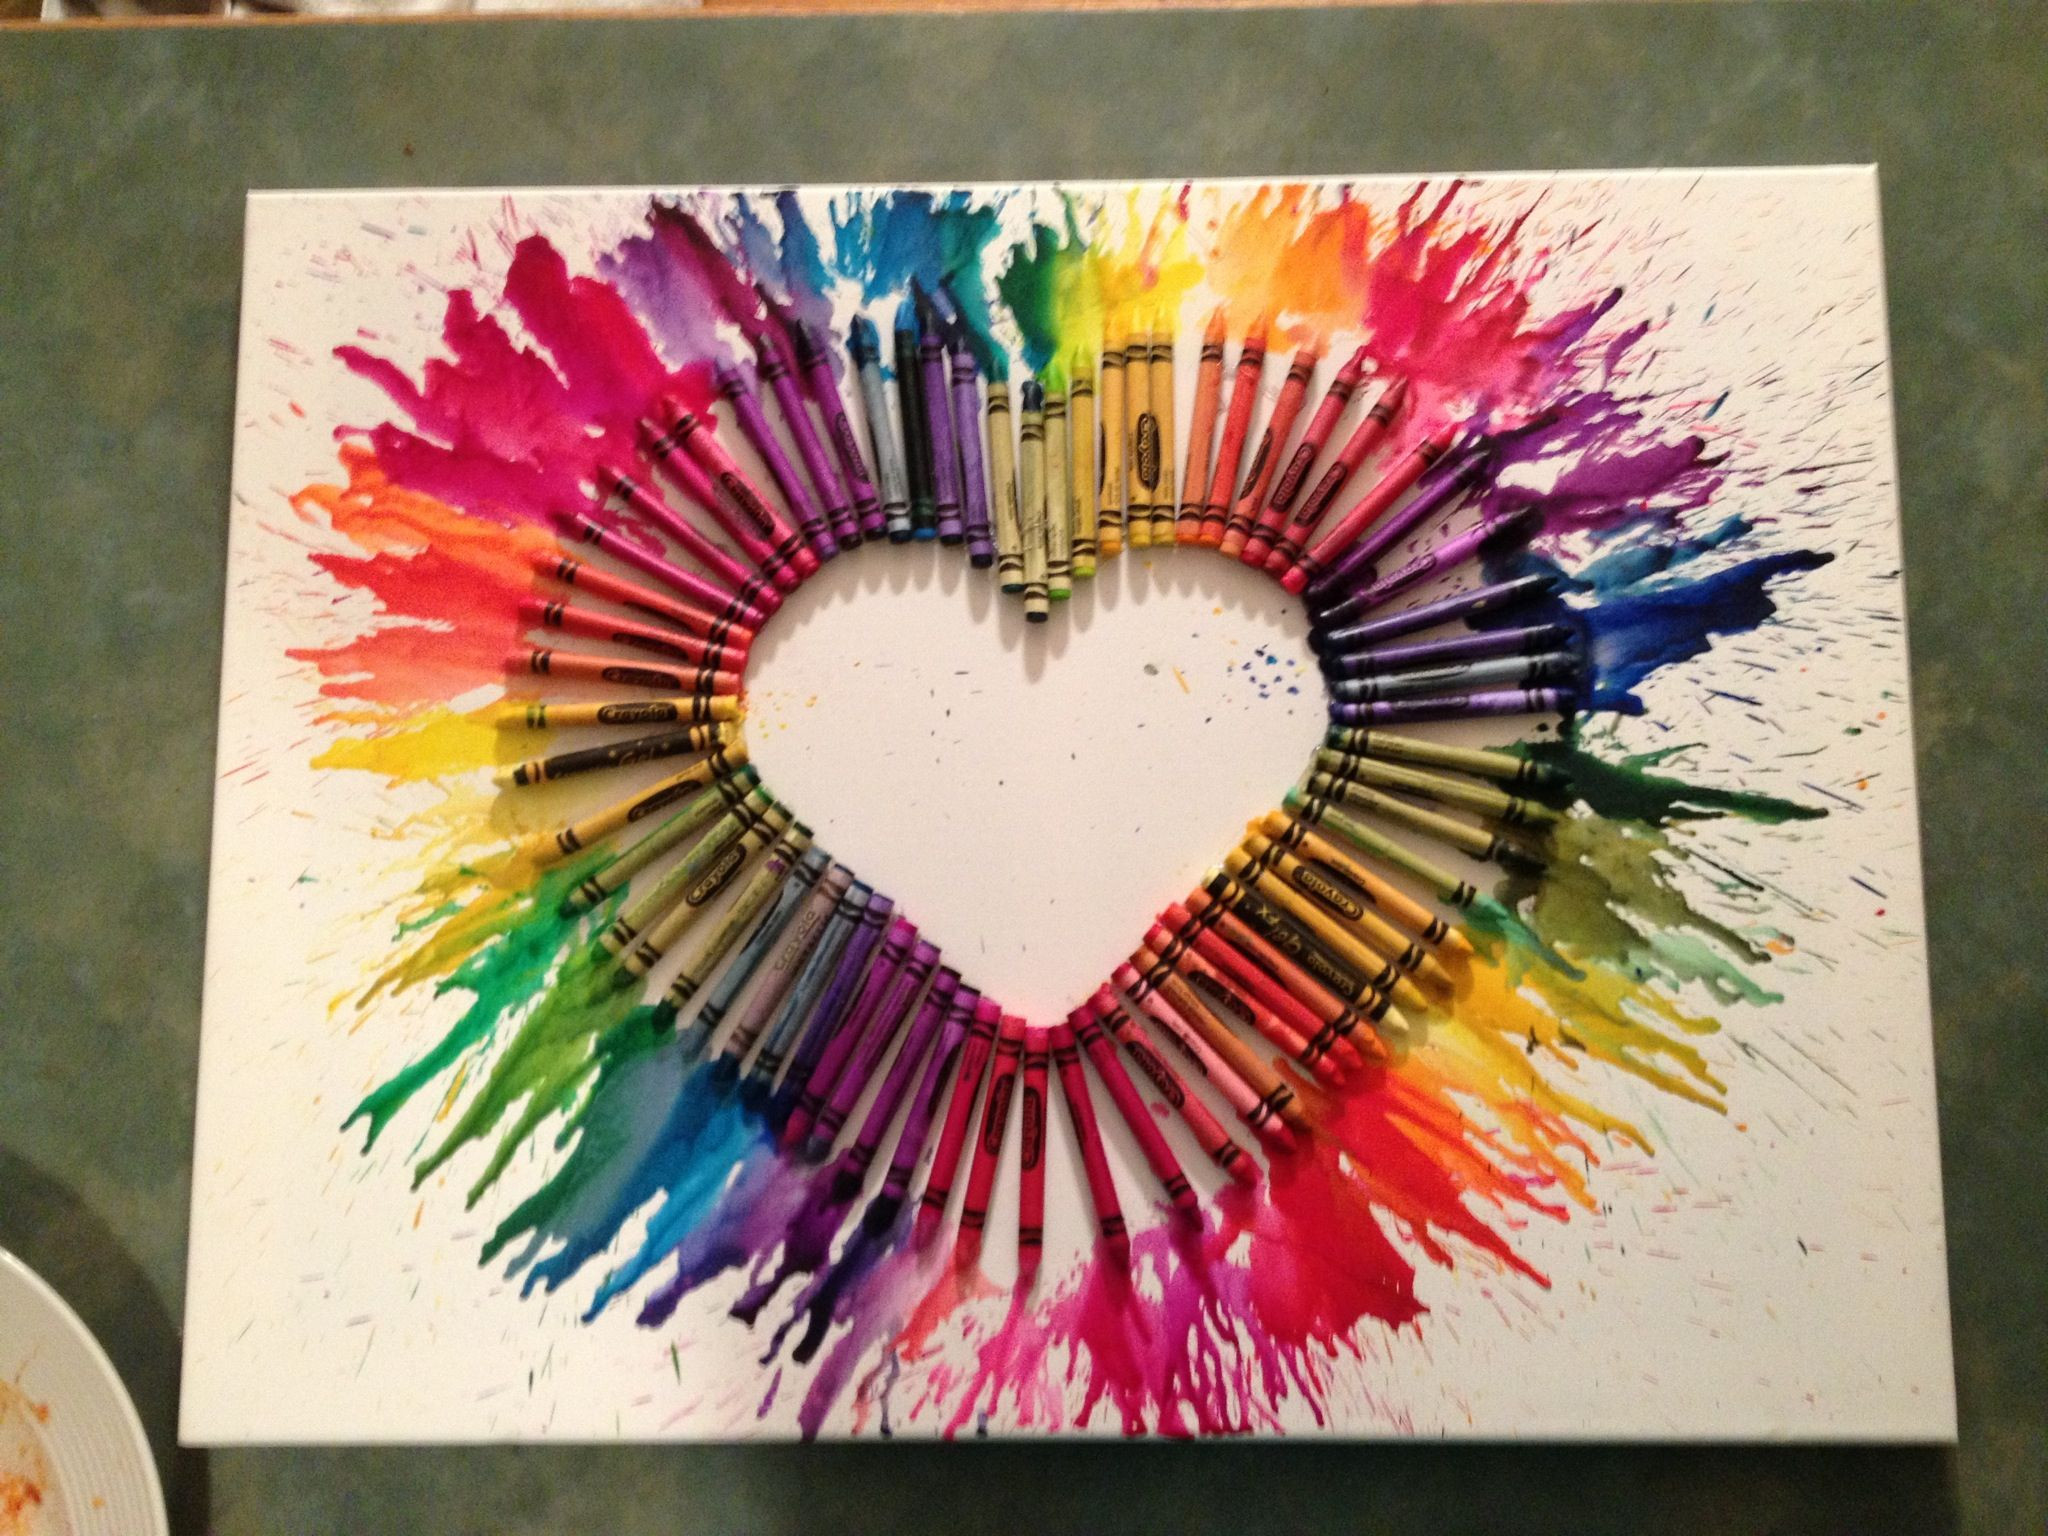 Pinterest Arts And Crafts For Adults
 Crayon art Arts and crafts project